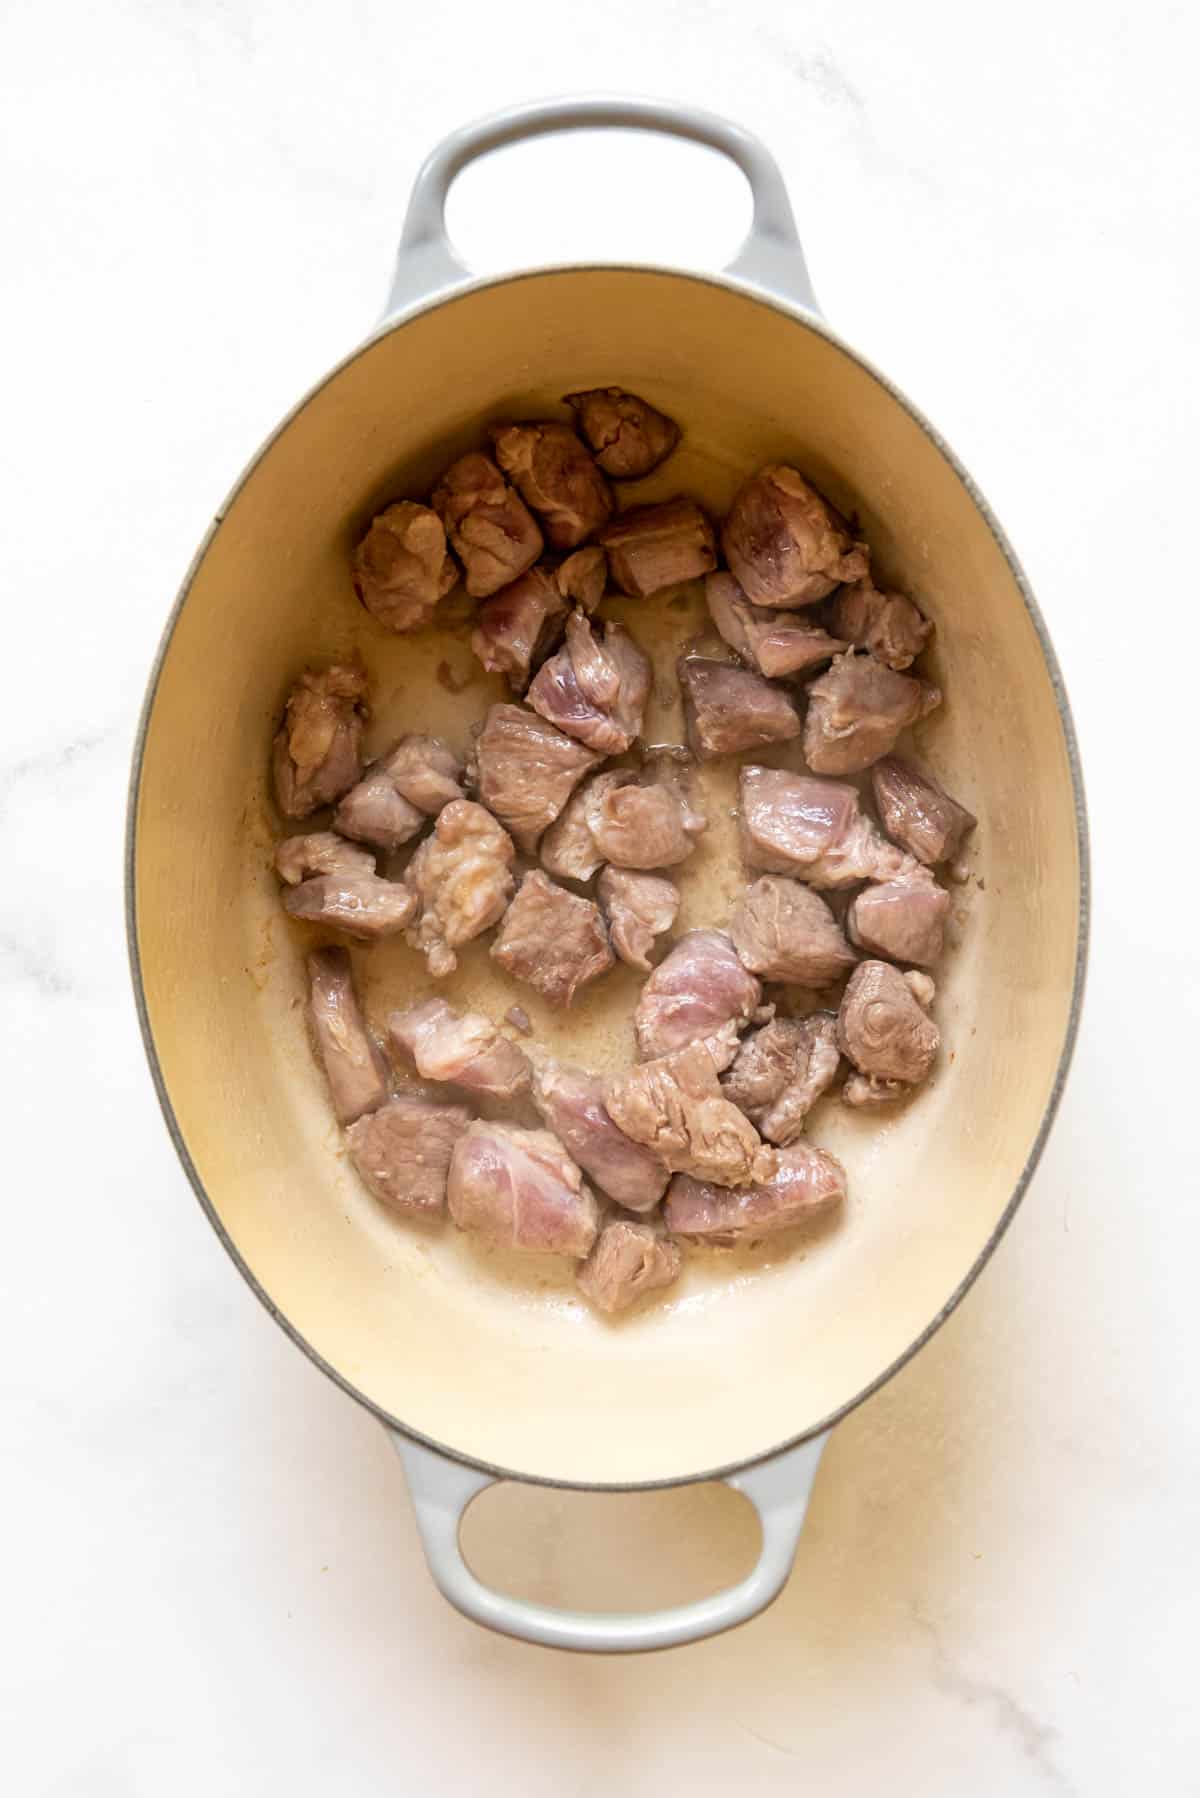 Top view of a casserole dish with pork pieces in it.